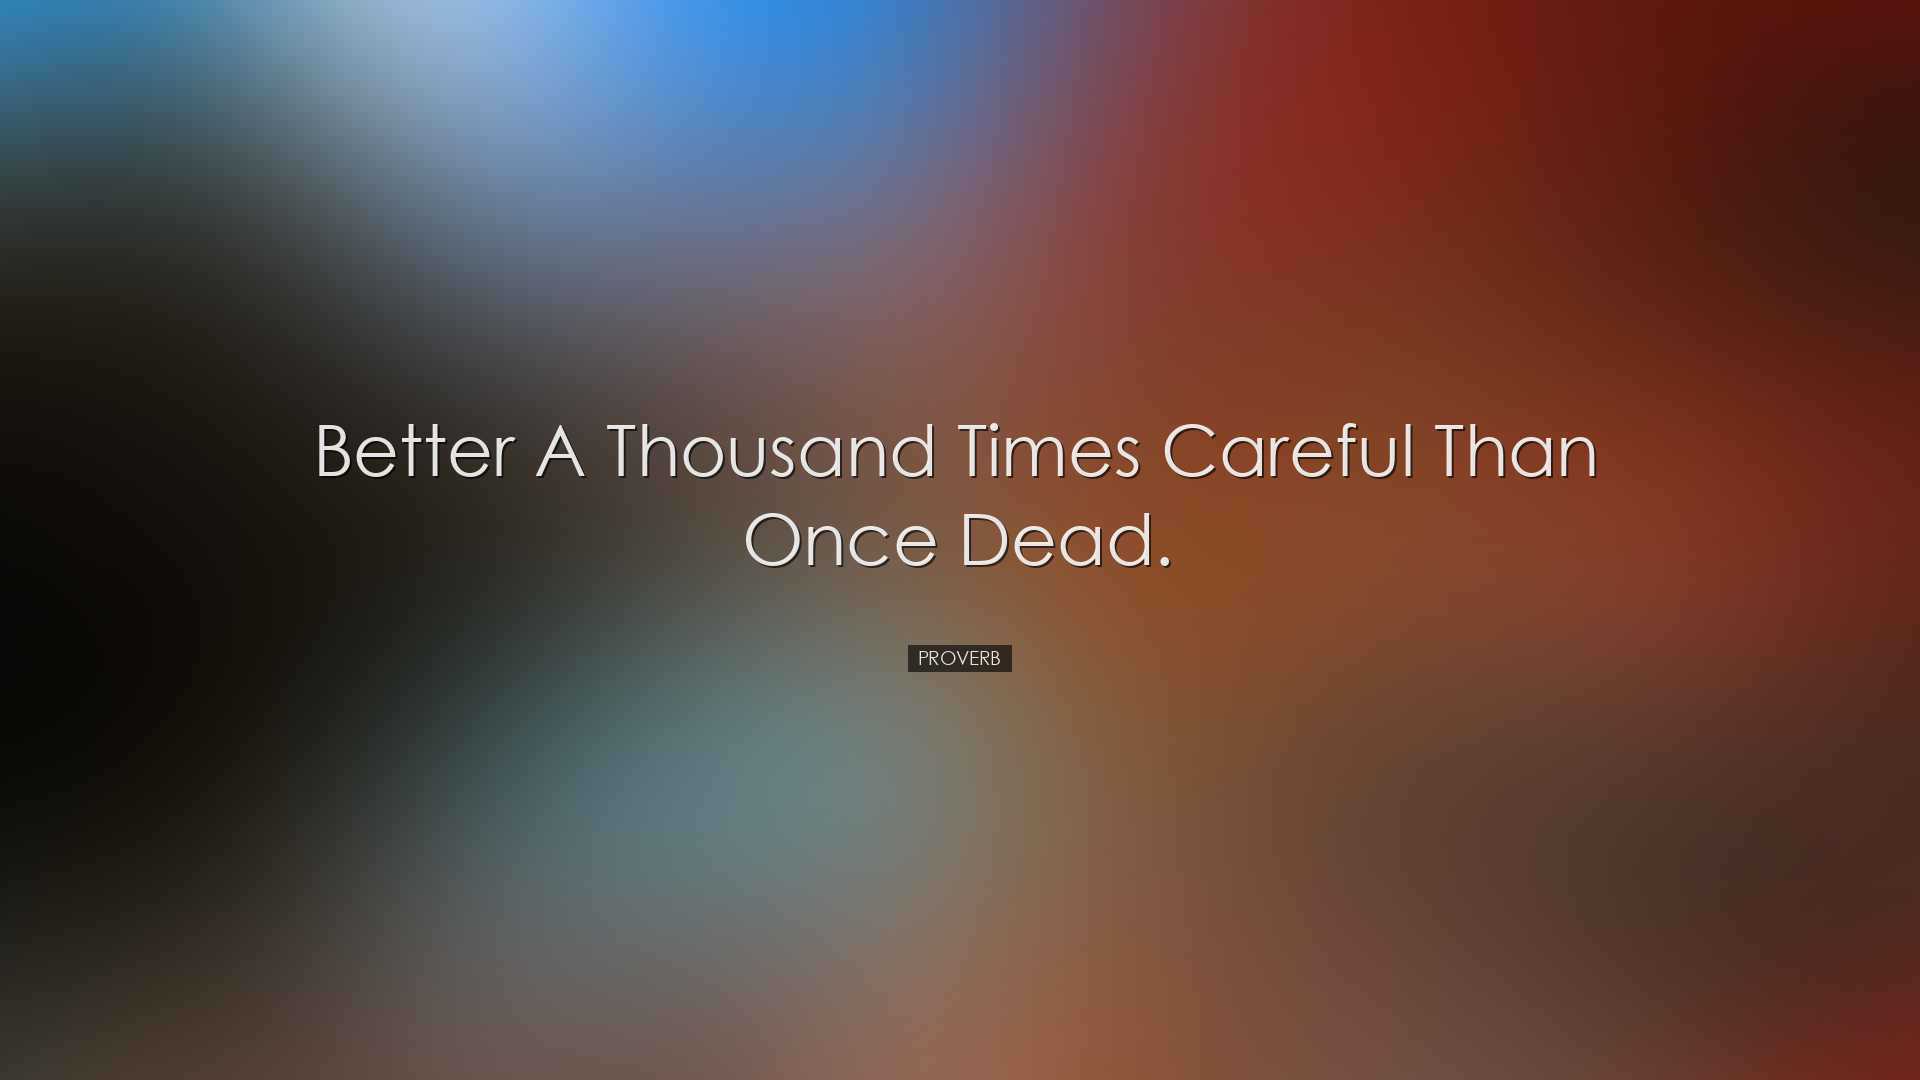 Better a thousand times careful than once dead. - Proverb